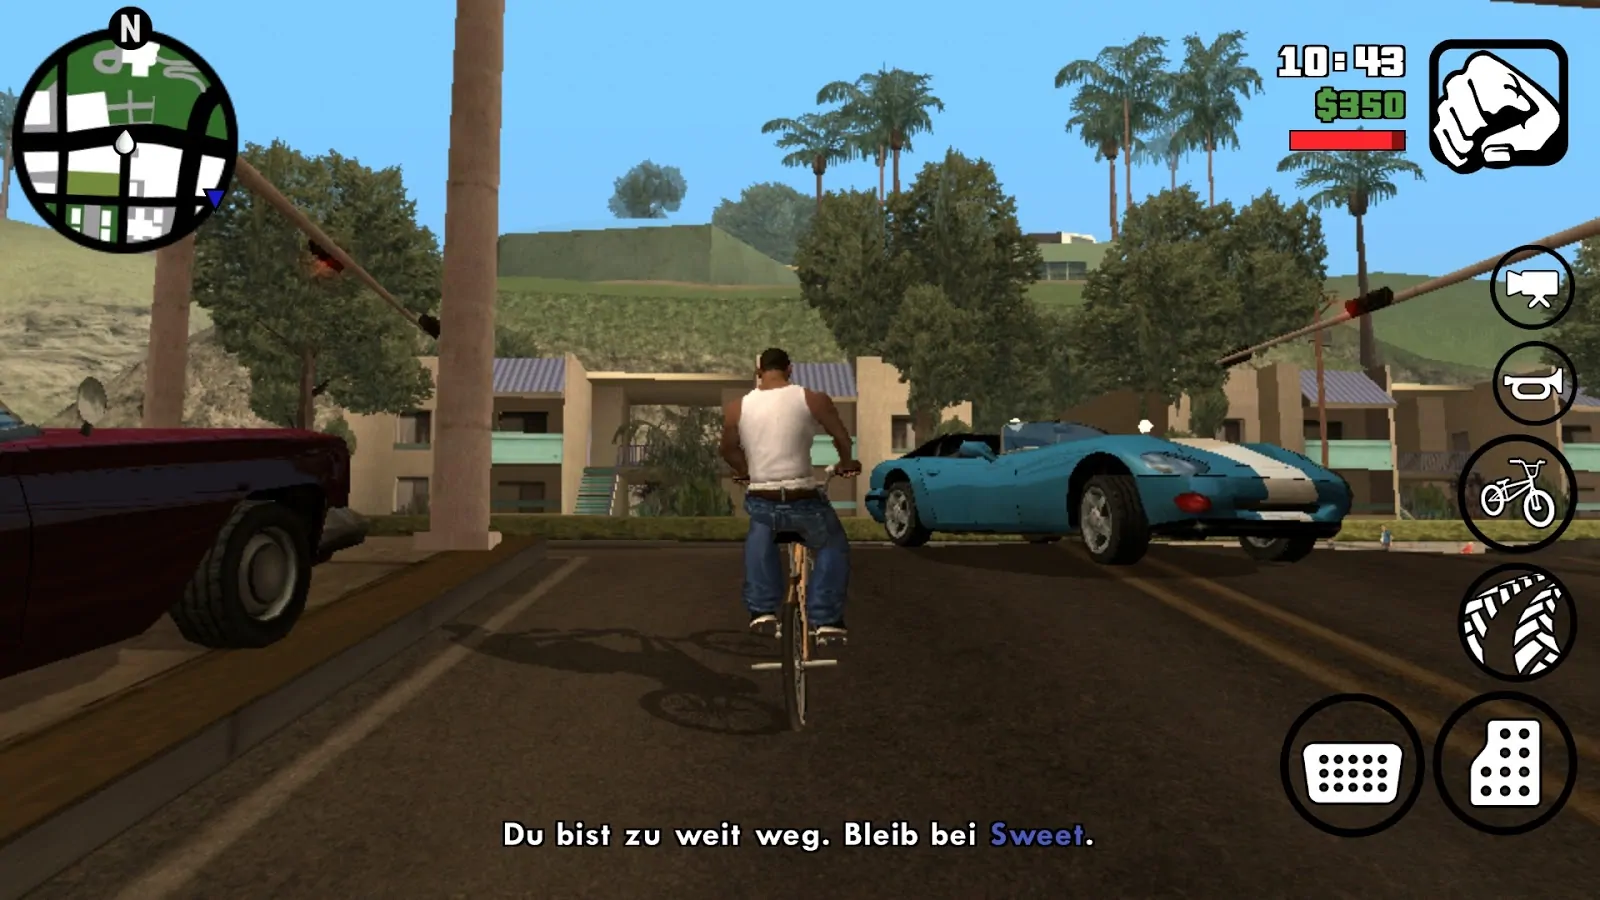 grand-theft-auto-san-andreas-android-apk-download-droidapk-org-3